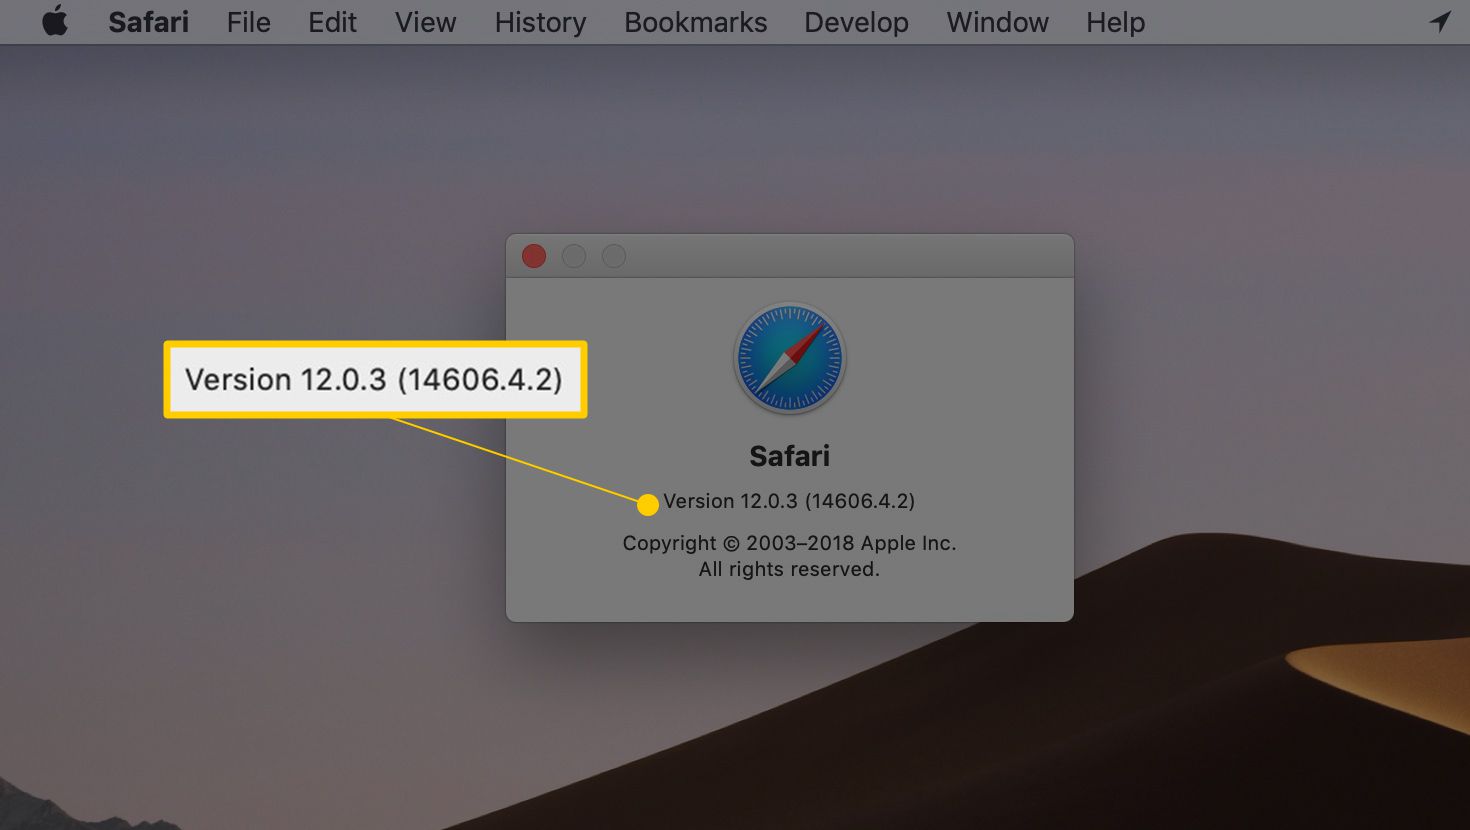 How To Check The Version Of Safari You Have